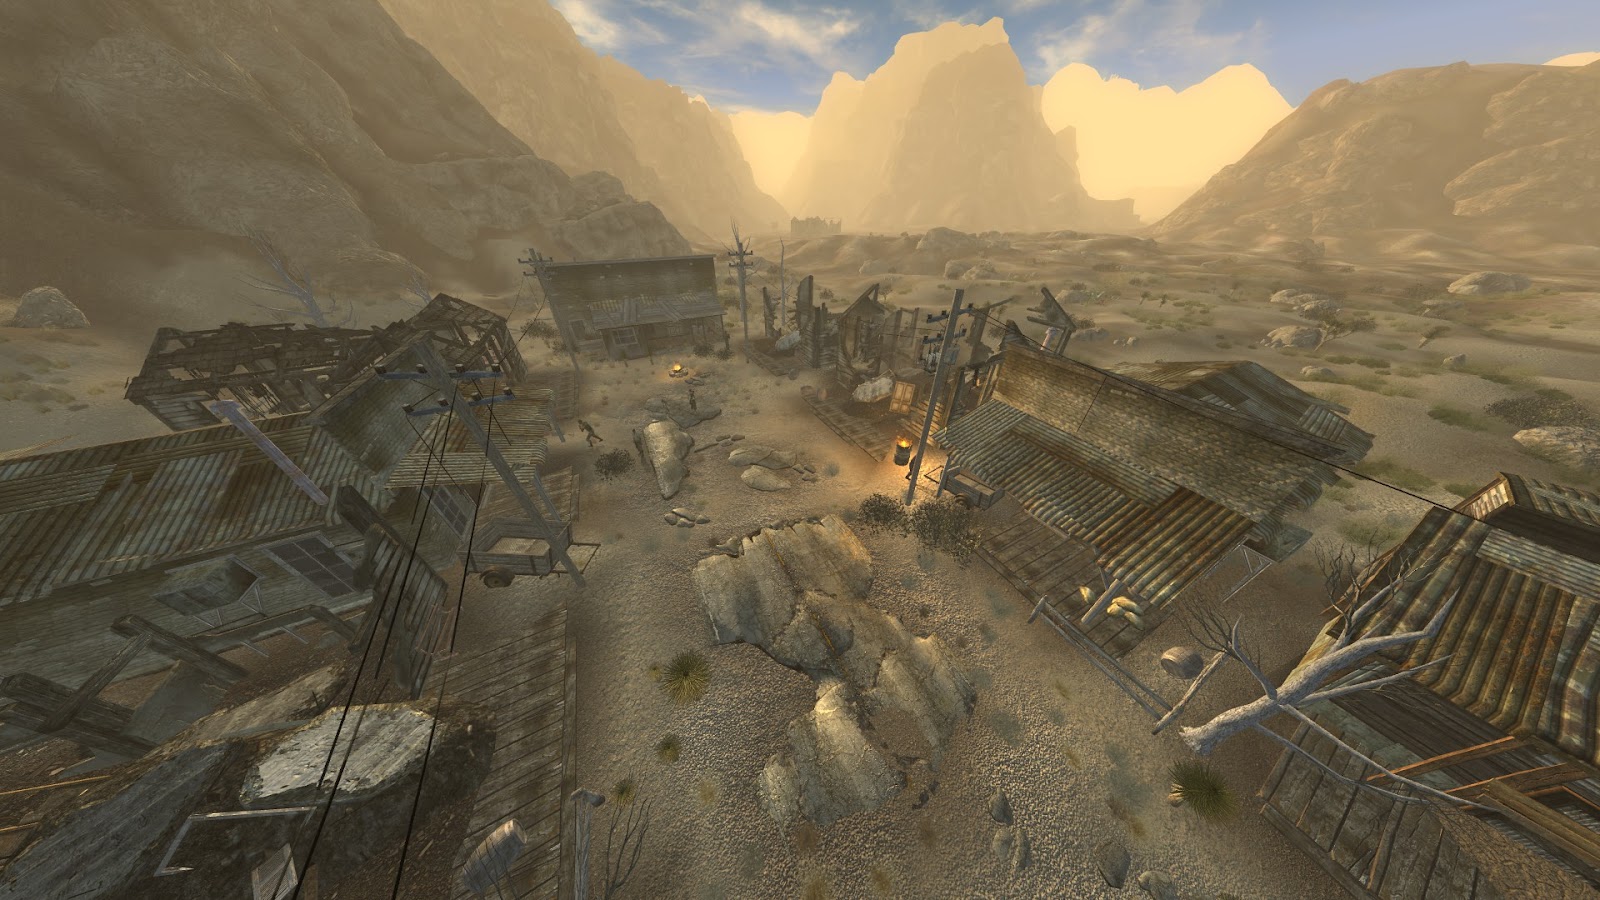 Overview of the camp from an elevated view | Fallout: New Vegas